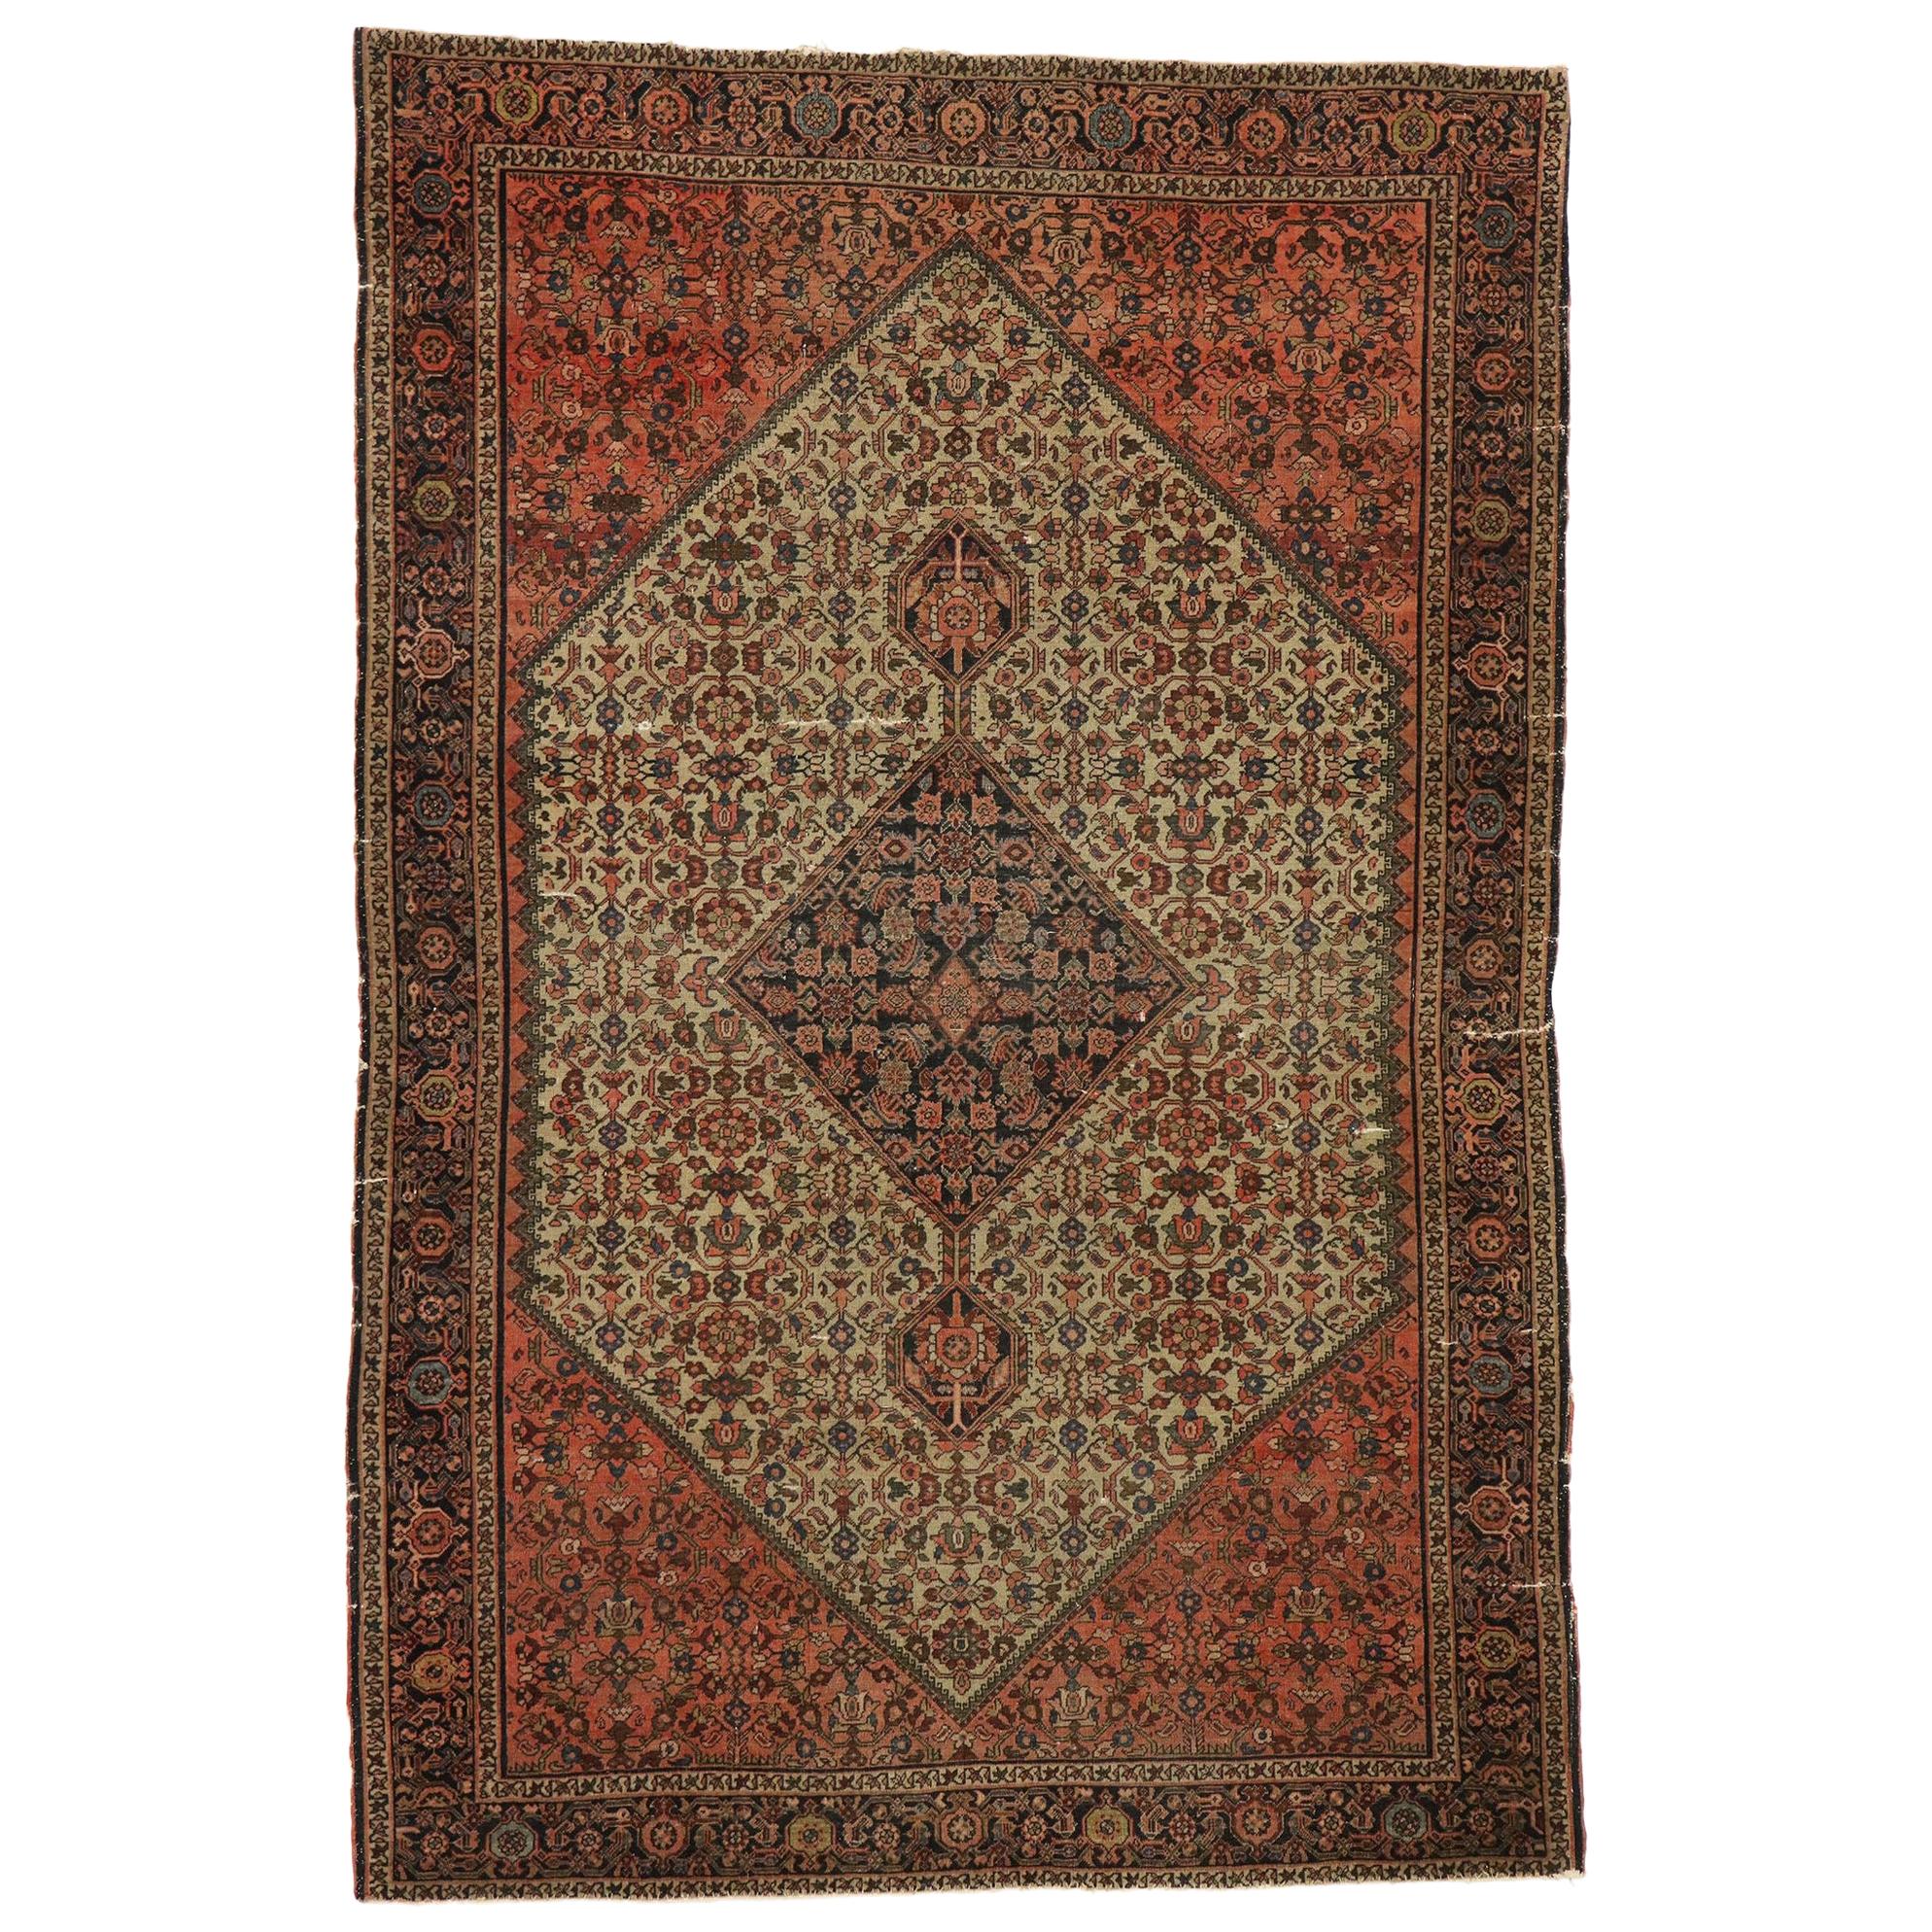 Distressed Antique Persian Farahan Rug withy Rustic Craftsman Style